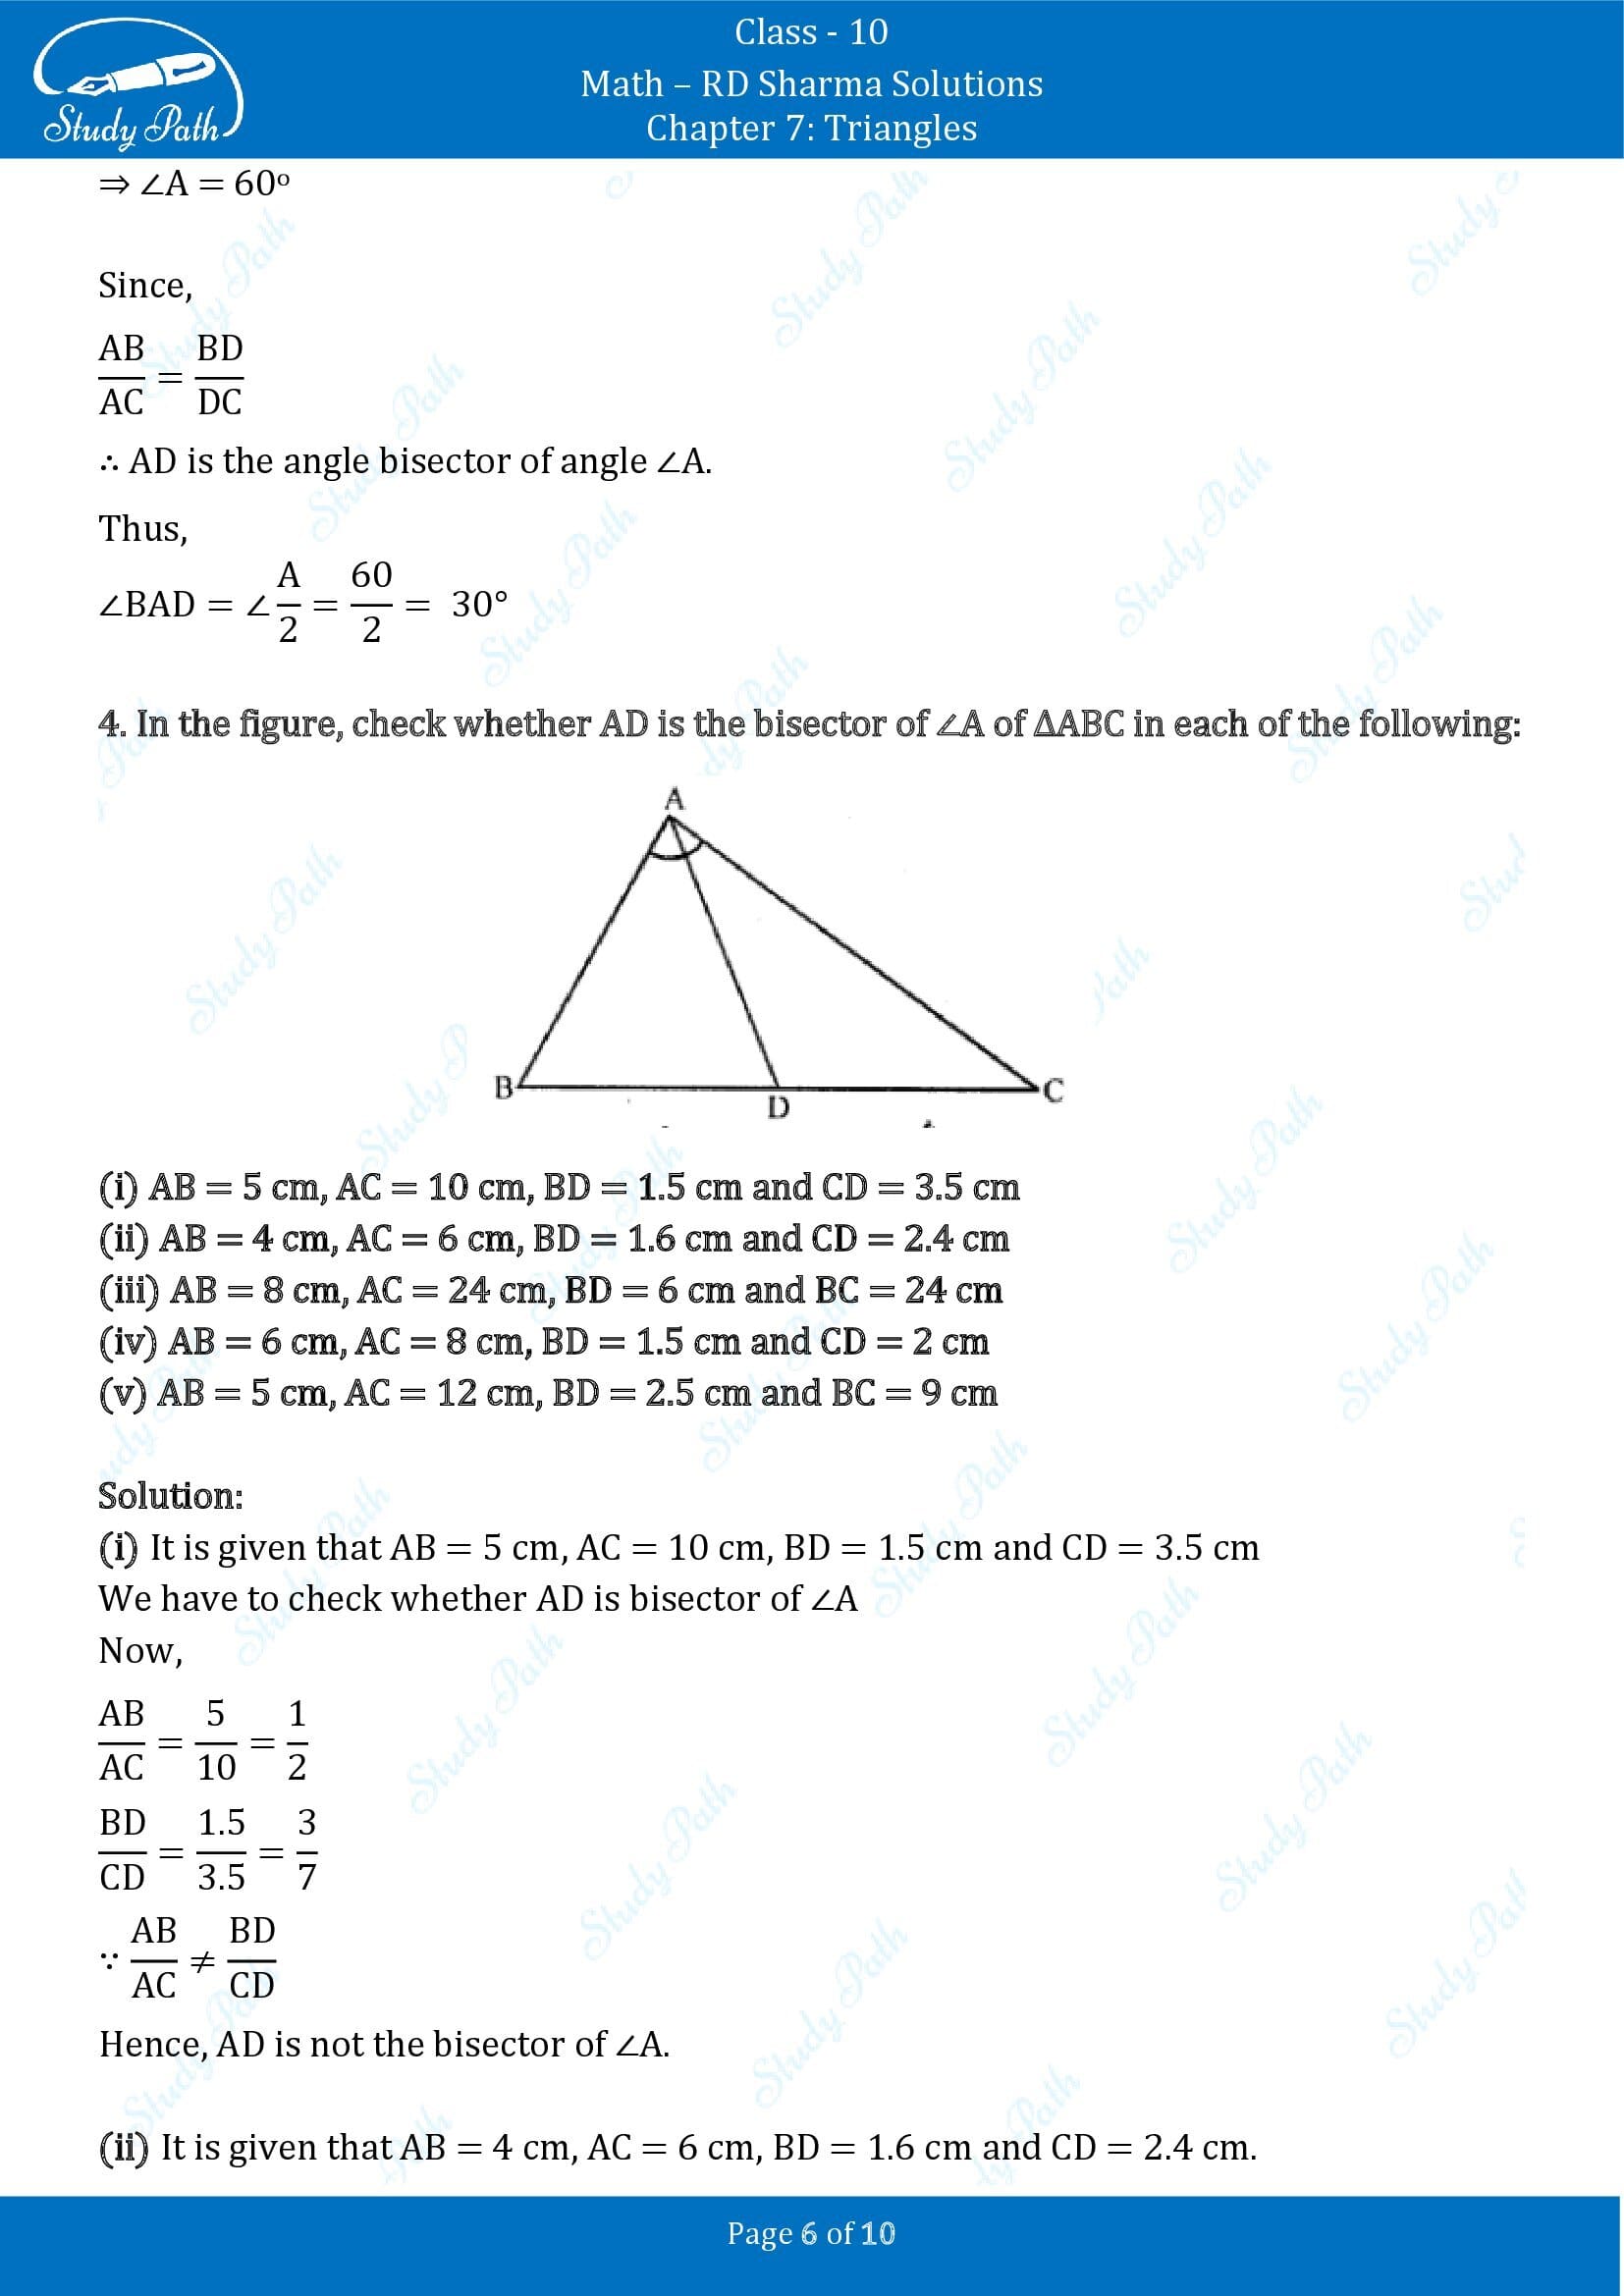 RD Sharma Solutions Class 10 Chapter 7 Triangles Exercise 7.3 00006